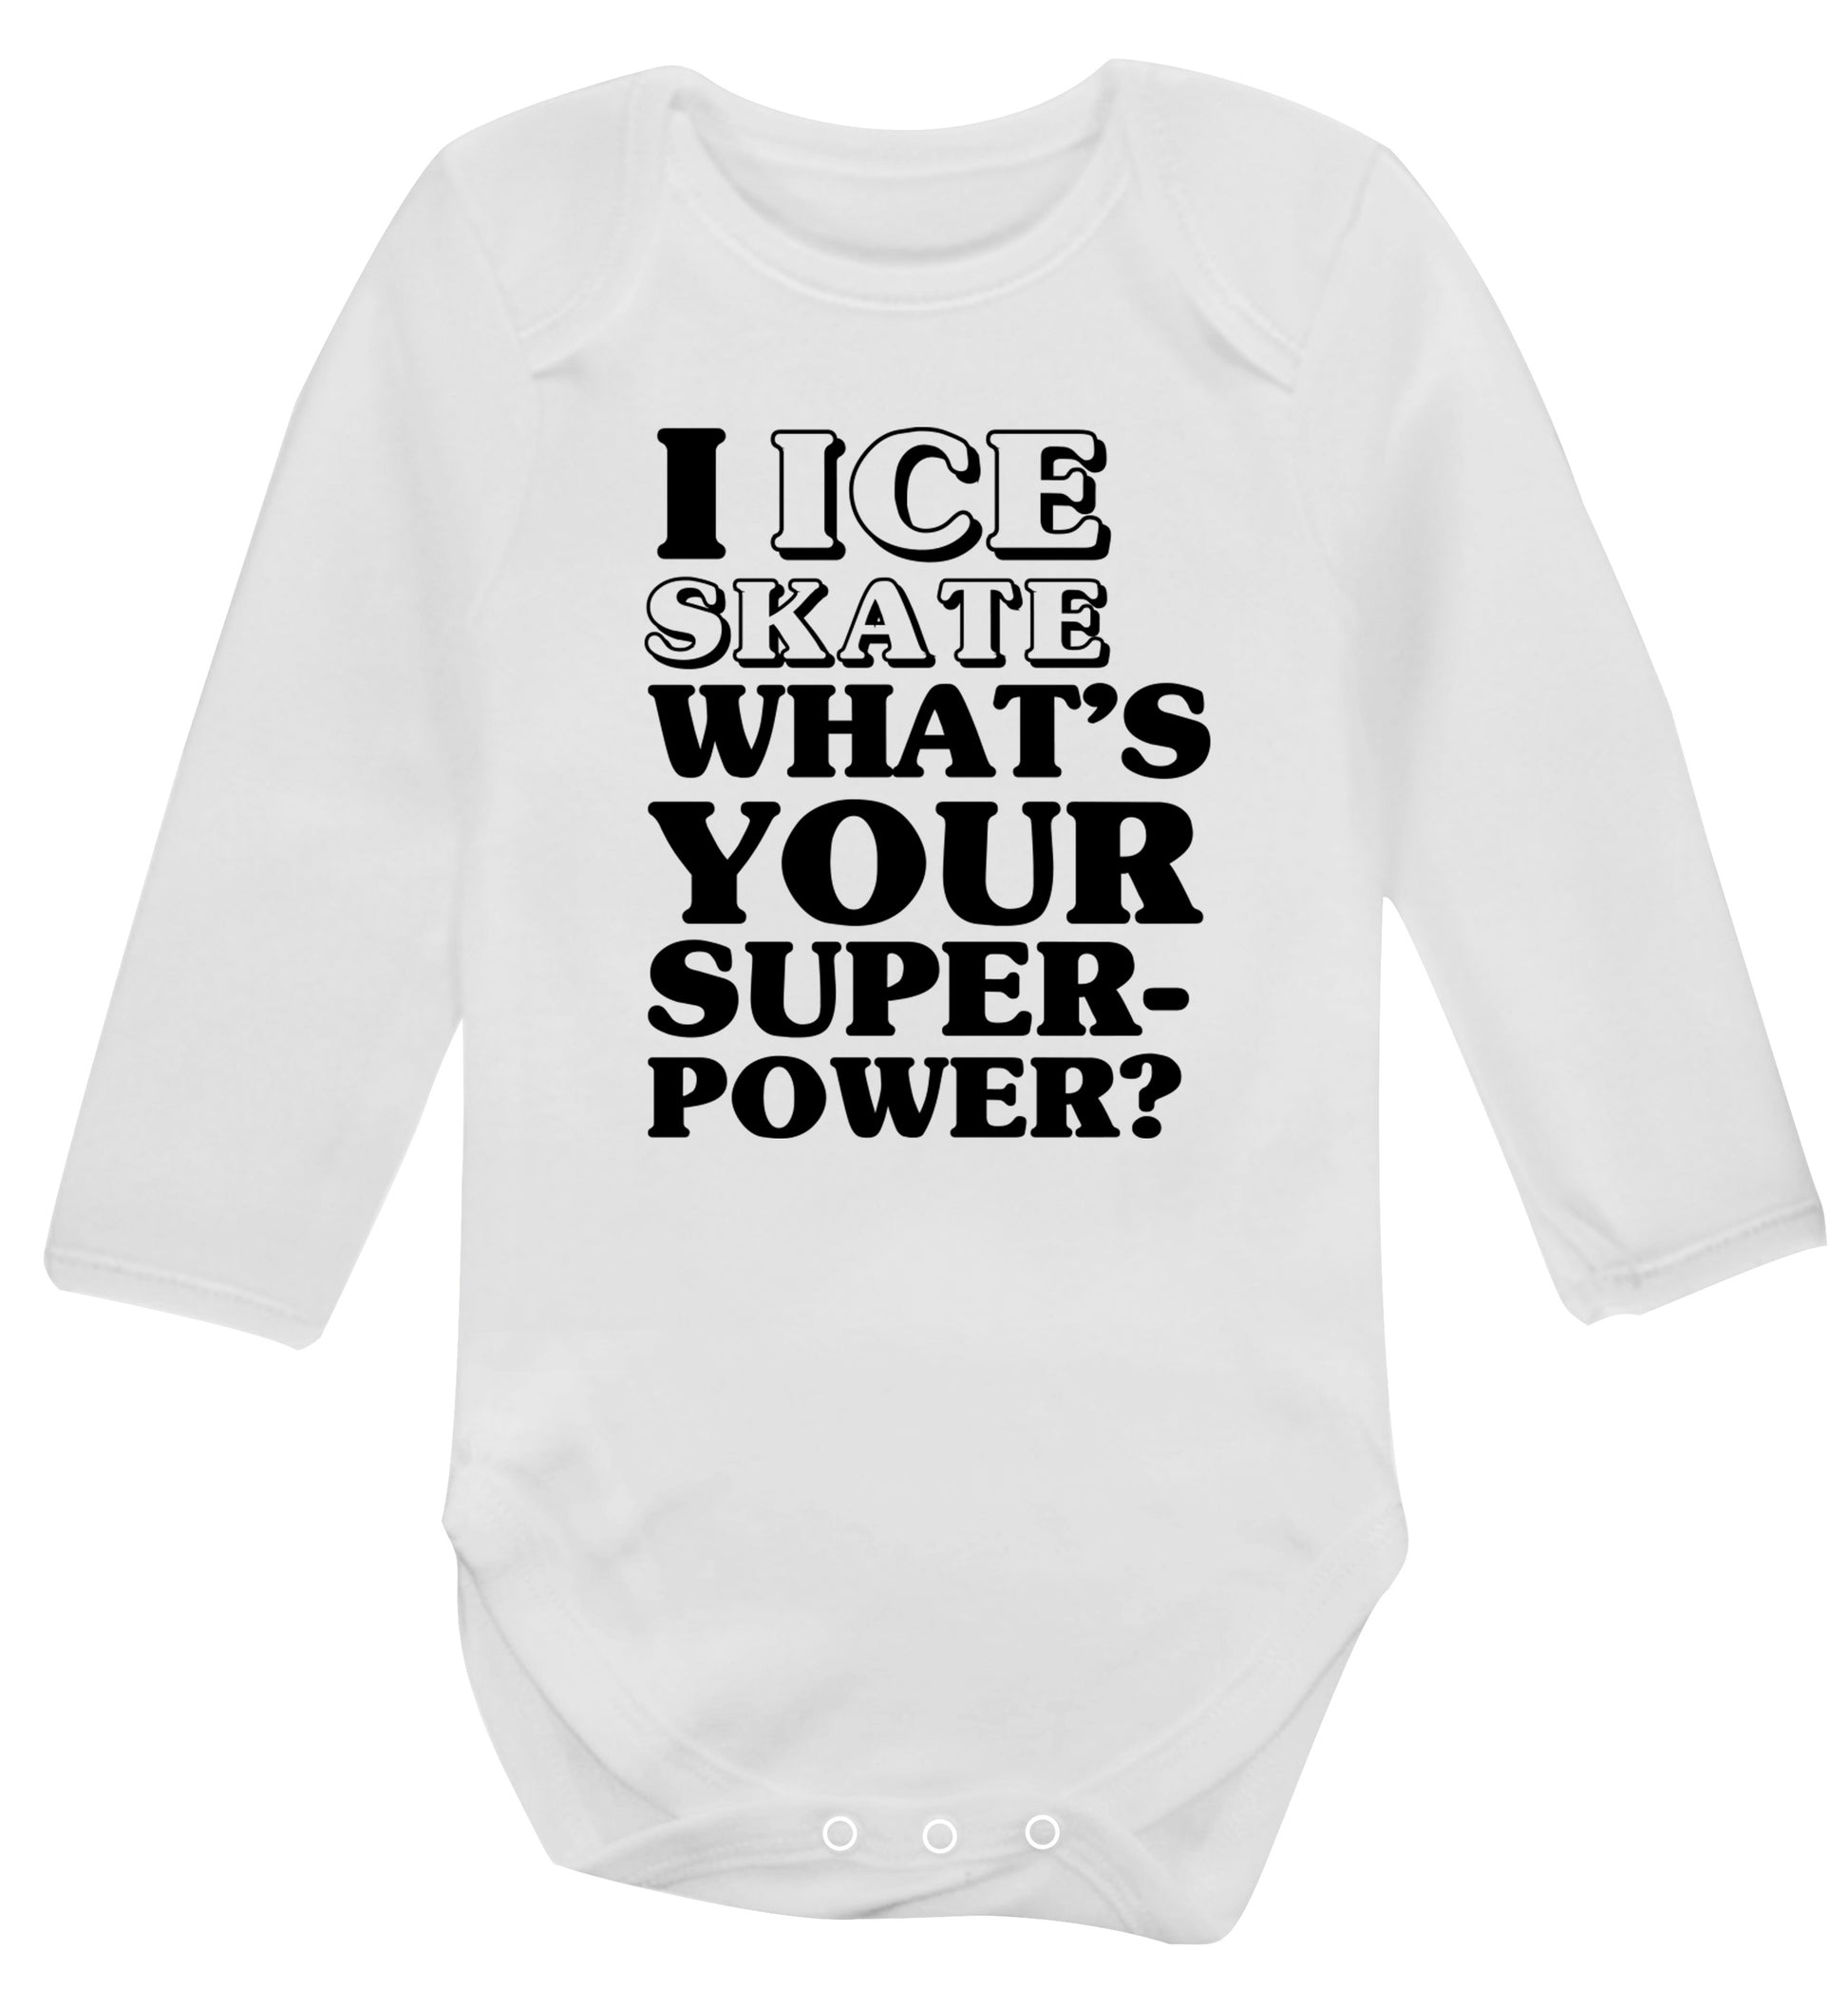 I ice skate what's your superpower? Baby Vest long sleeved white 6-12 months